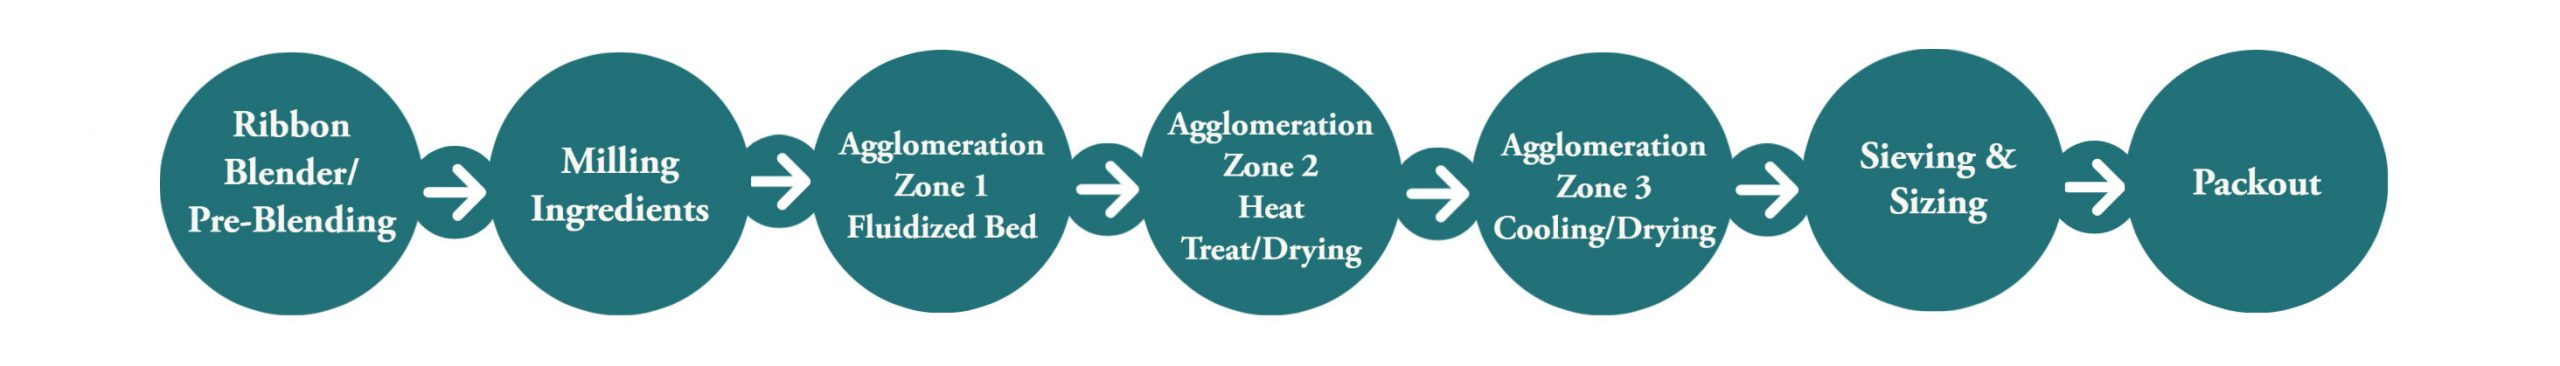 Agglomeration process: Ribbon blending, milling ingredients, zone 1 fluidized bed, zone 2 heat dry, zone 3 cooling, sieving & sizing, packout